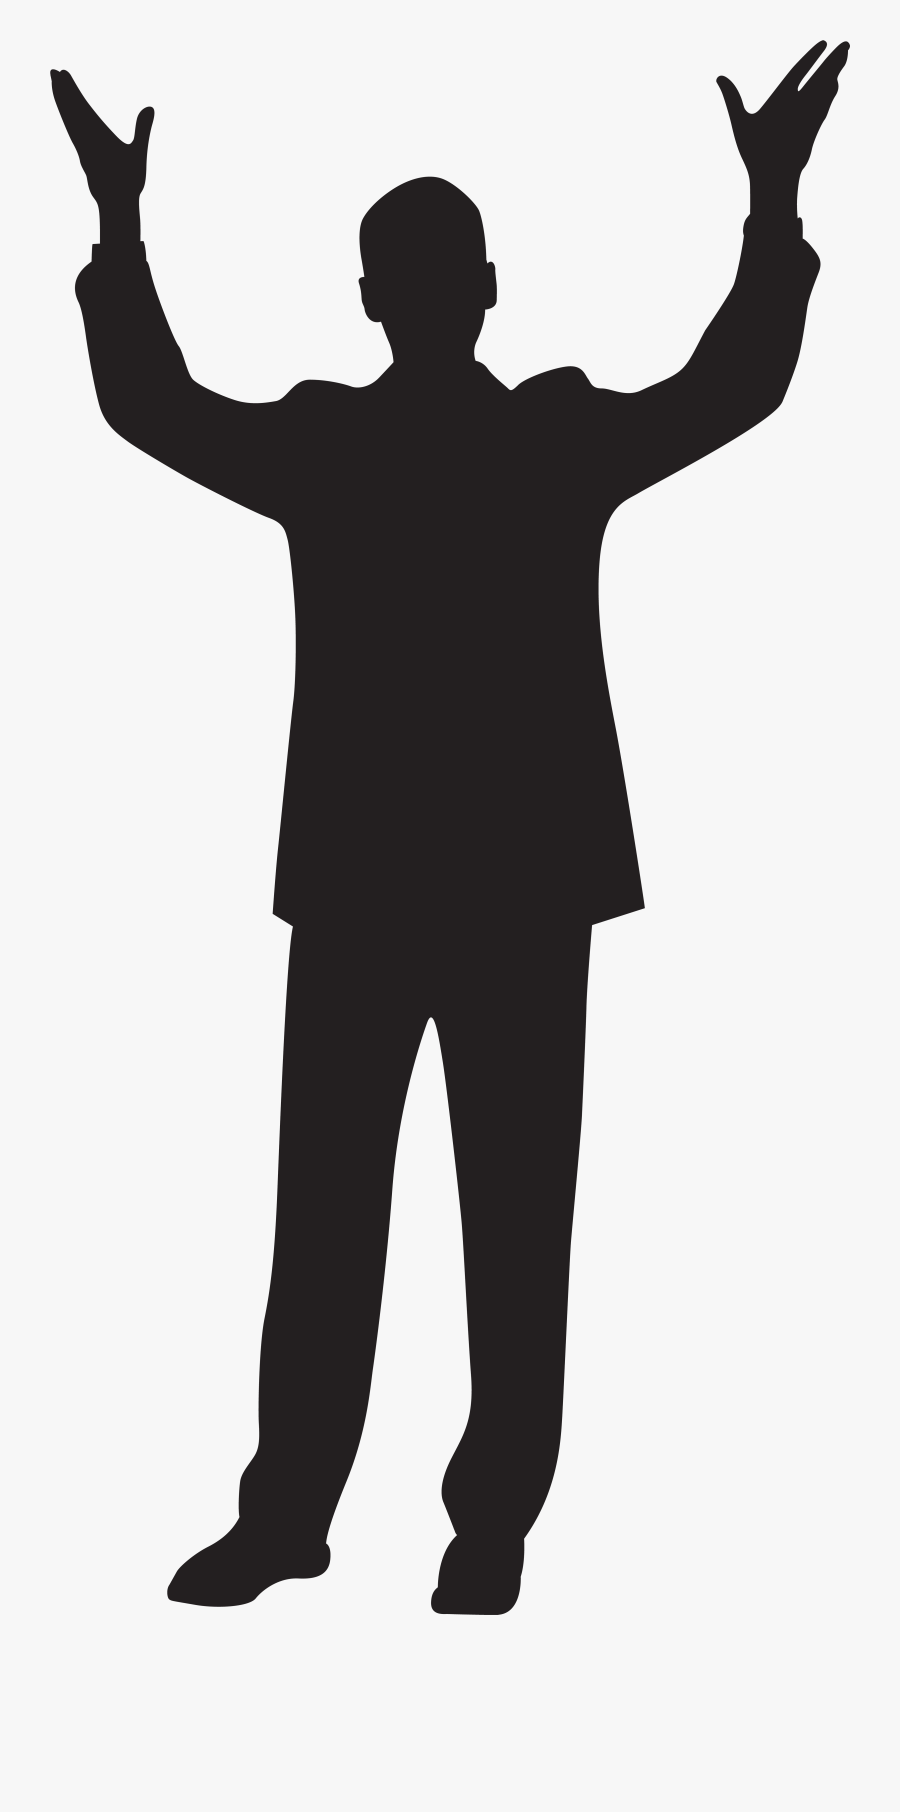 Man With Hands Up Silhouette Clip Art Imageu200b Gallery - Human Silhouette Hands Up, Transparent Clipart